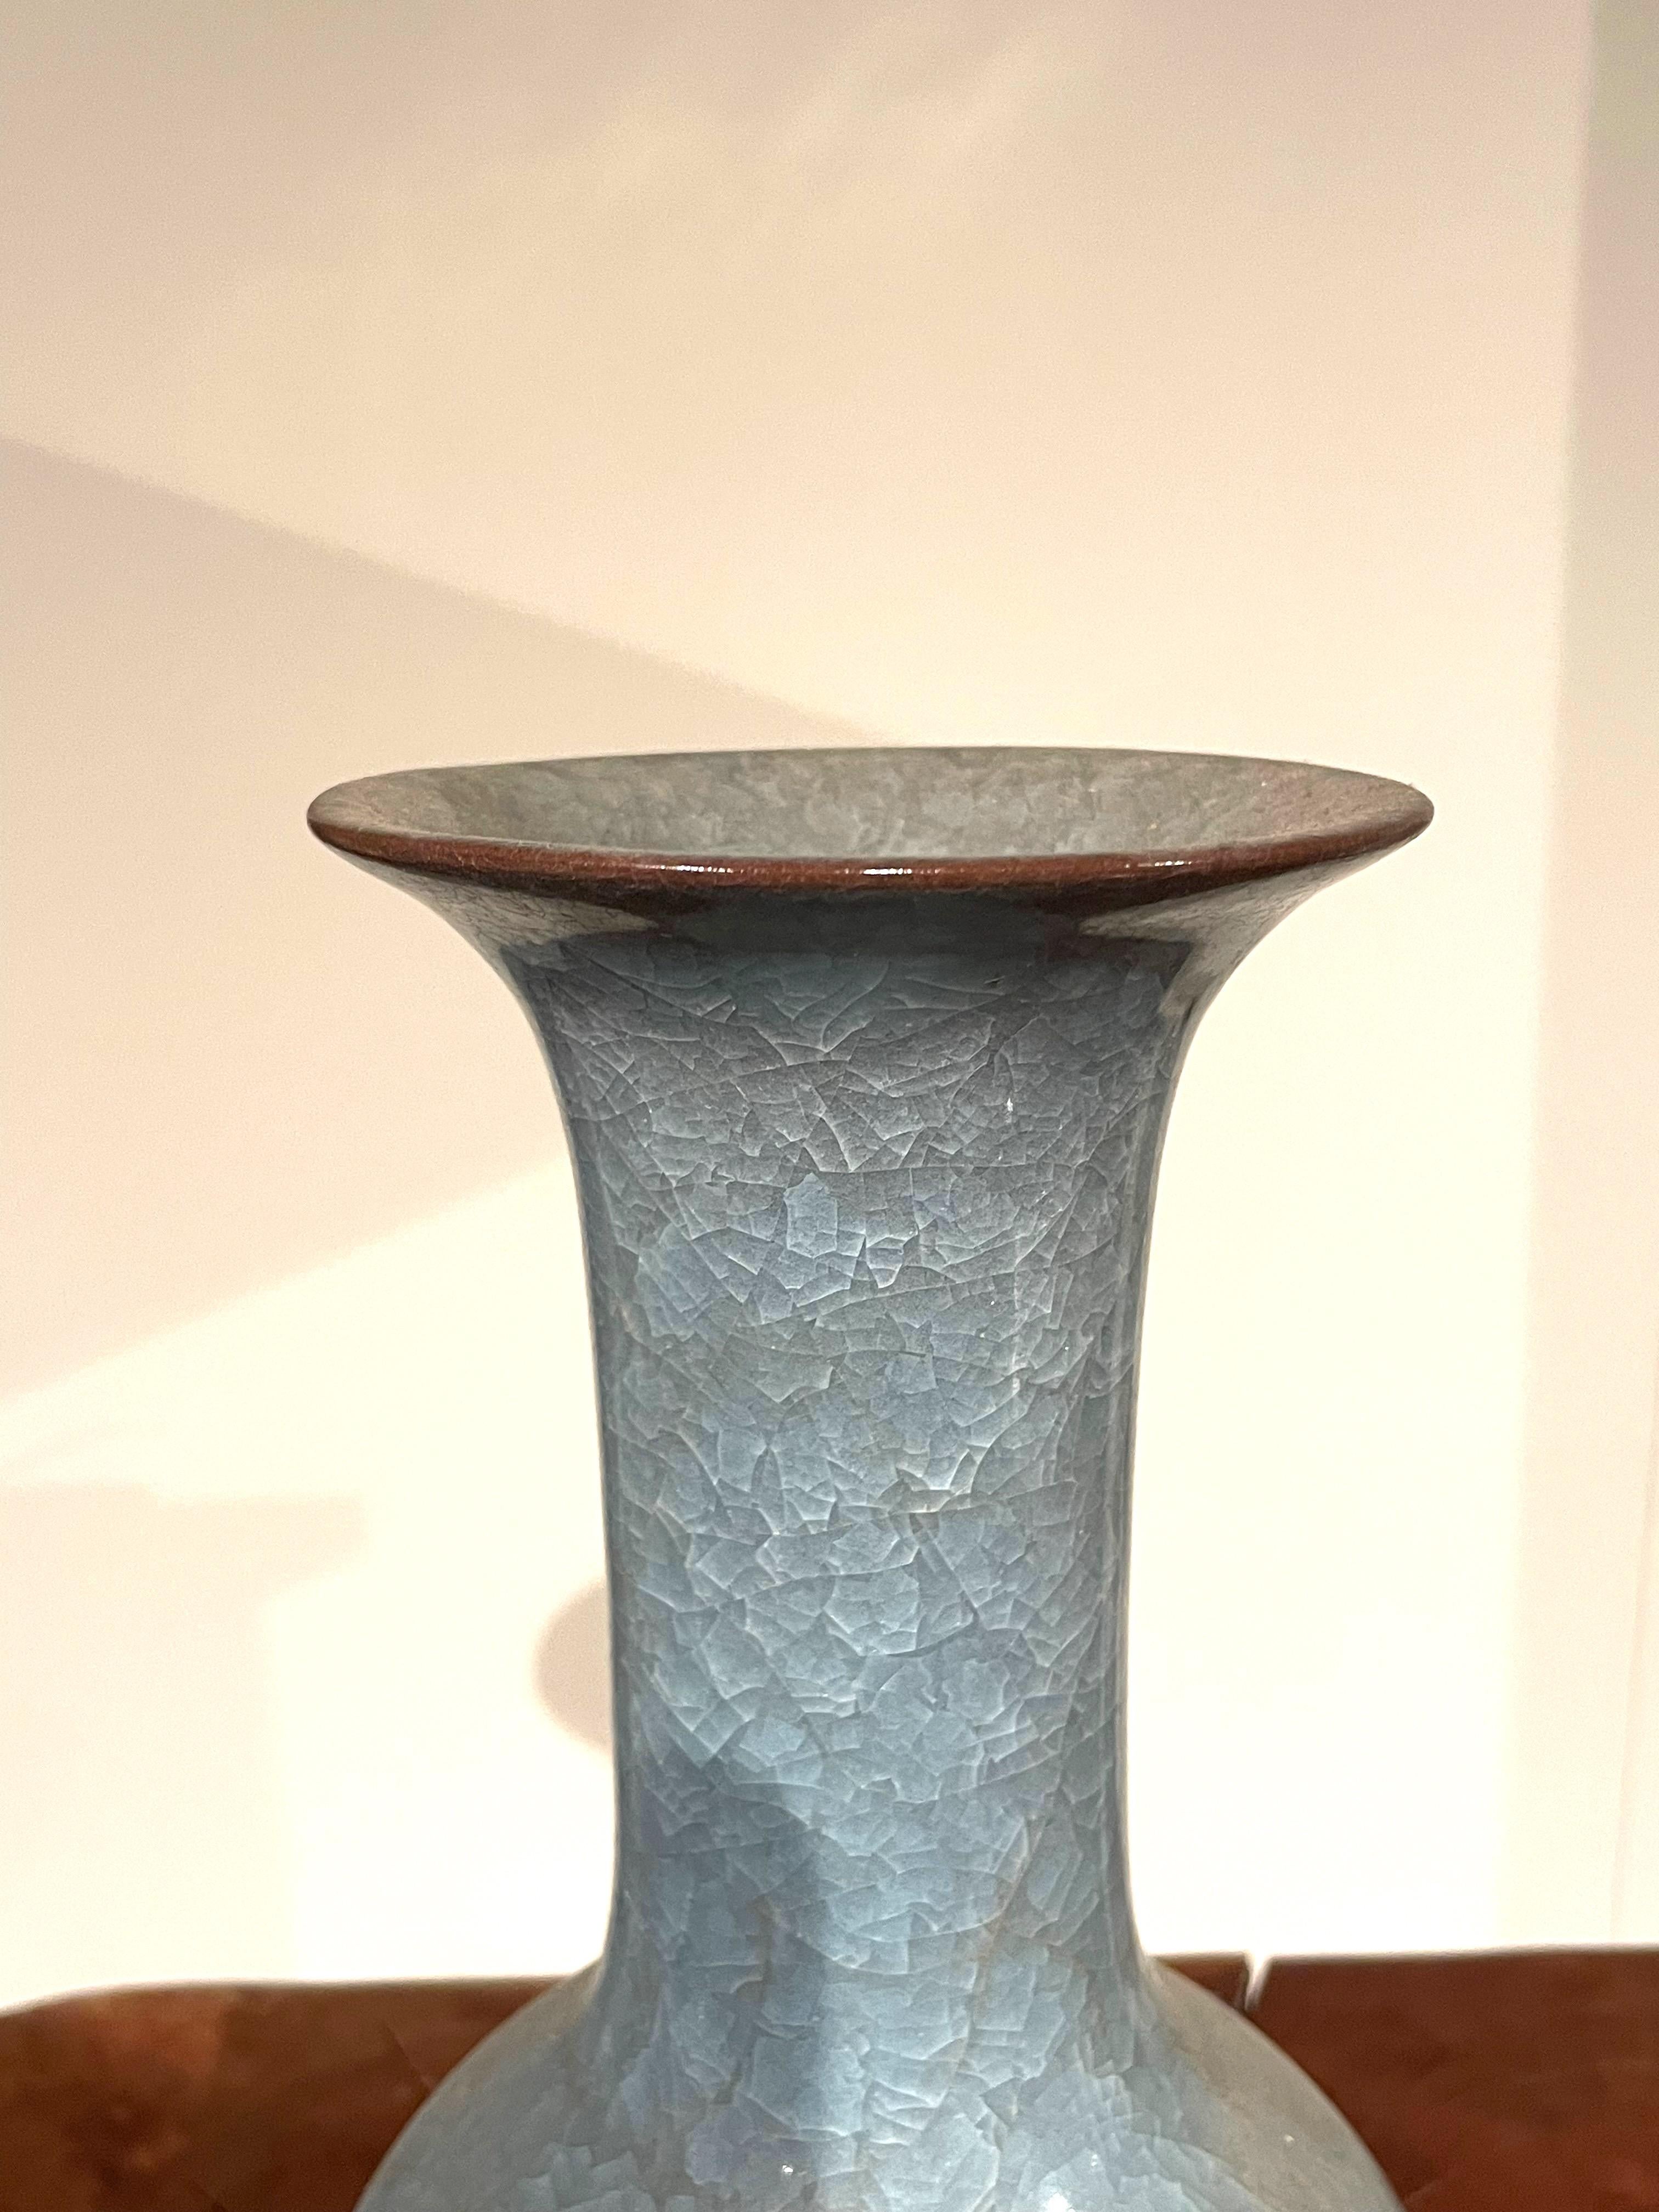 Contemporary Chinese blue vase with crackle glaze.
Elongated tubular neck.
From a large collection with varying shapes and sizes.
